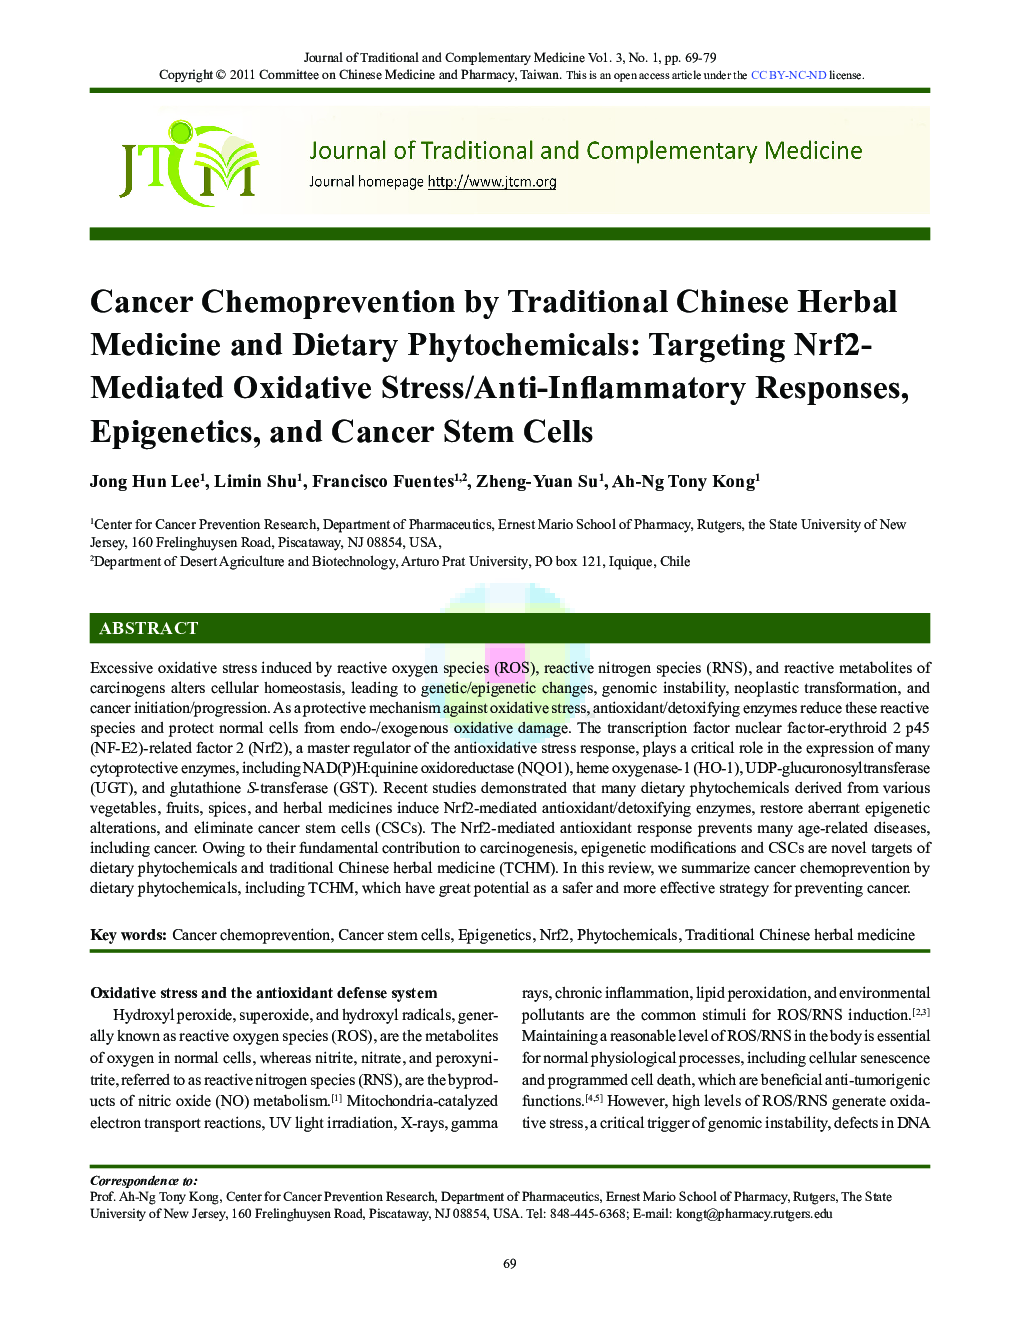 Cancer Chemoprevention by Traditional Chinese Herbal Medicine and Dietary Phytochemicals: Targeting Nrf2-Mediated Oxidative Stress/Anti-Inflammatory Responses, Epigenetics, and Cancer Stem Cells